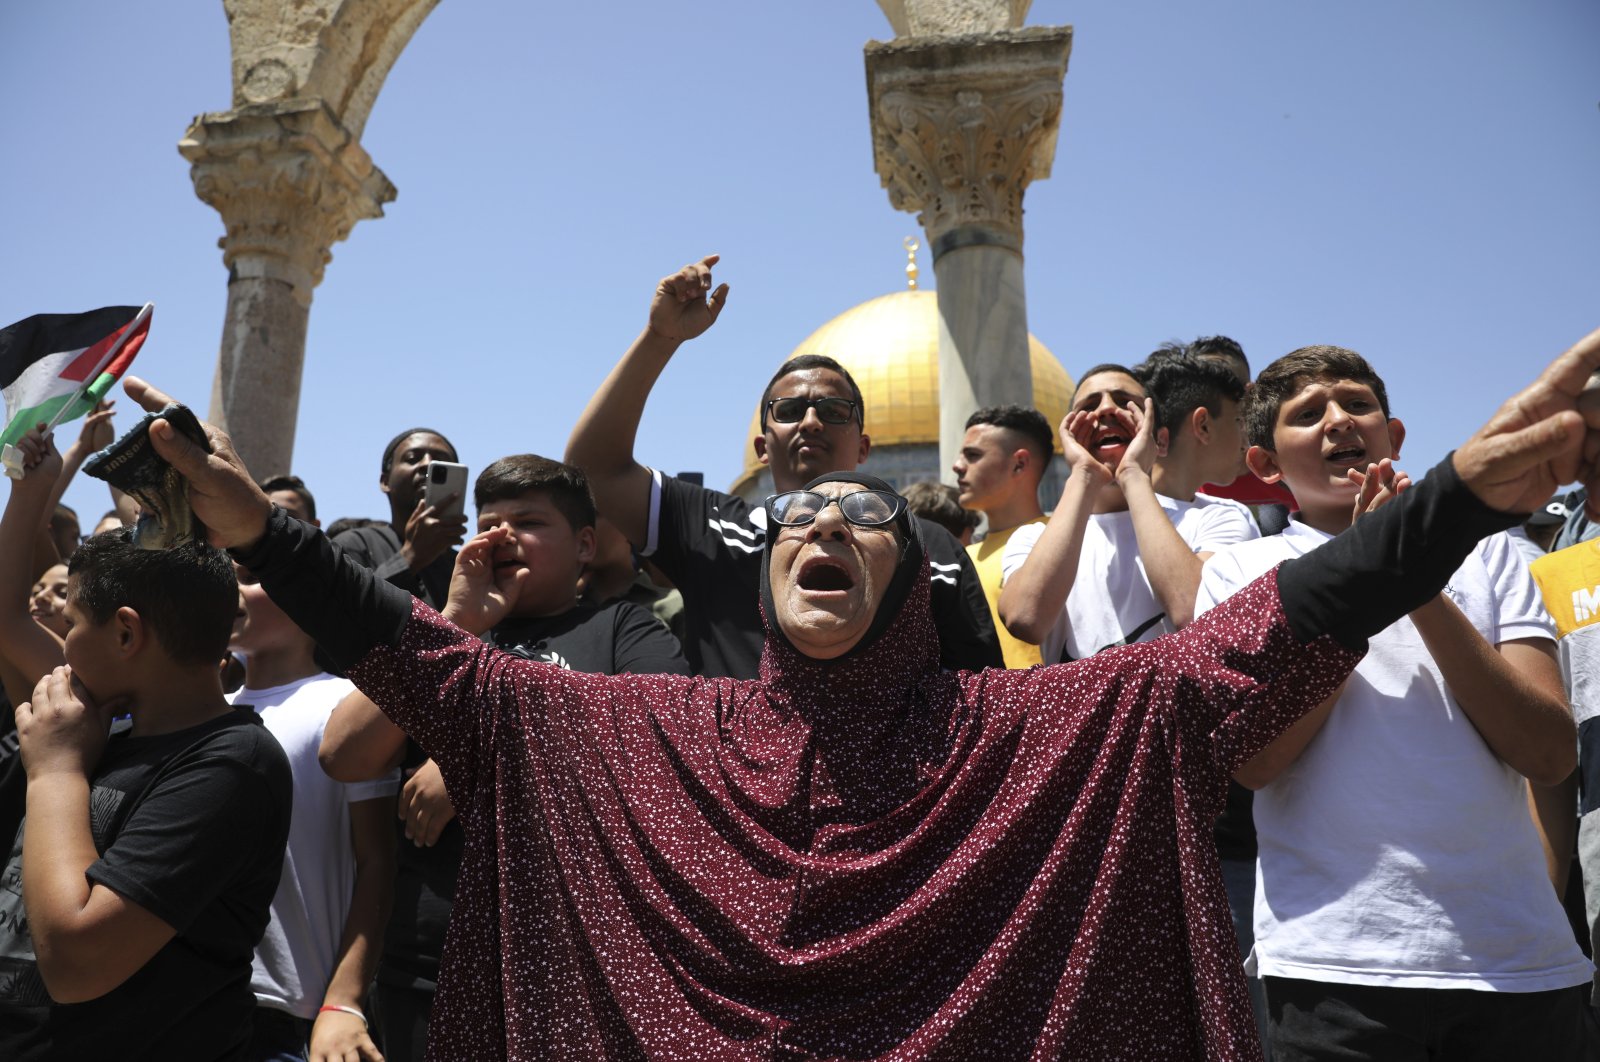 Palestinians chant slogans at a protest following Friday prayers at the Dome of the Rock Mosque at the Al-Aqsa Mosque compound in the Old City of Jerusalem, Friday, May 28, 2021. (AP Photo)